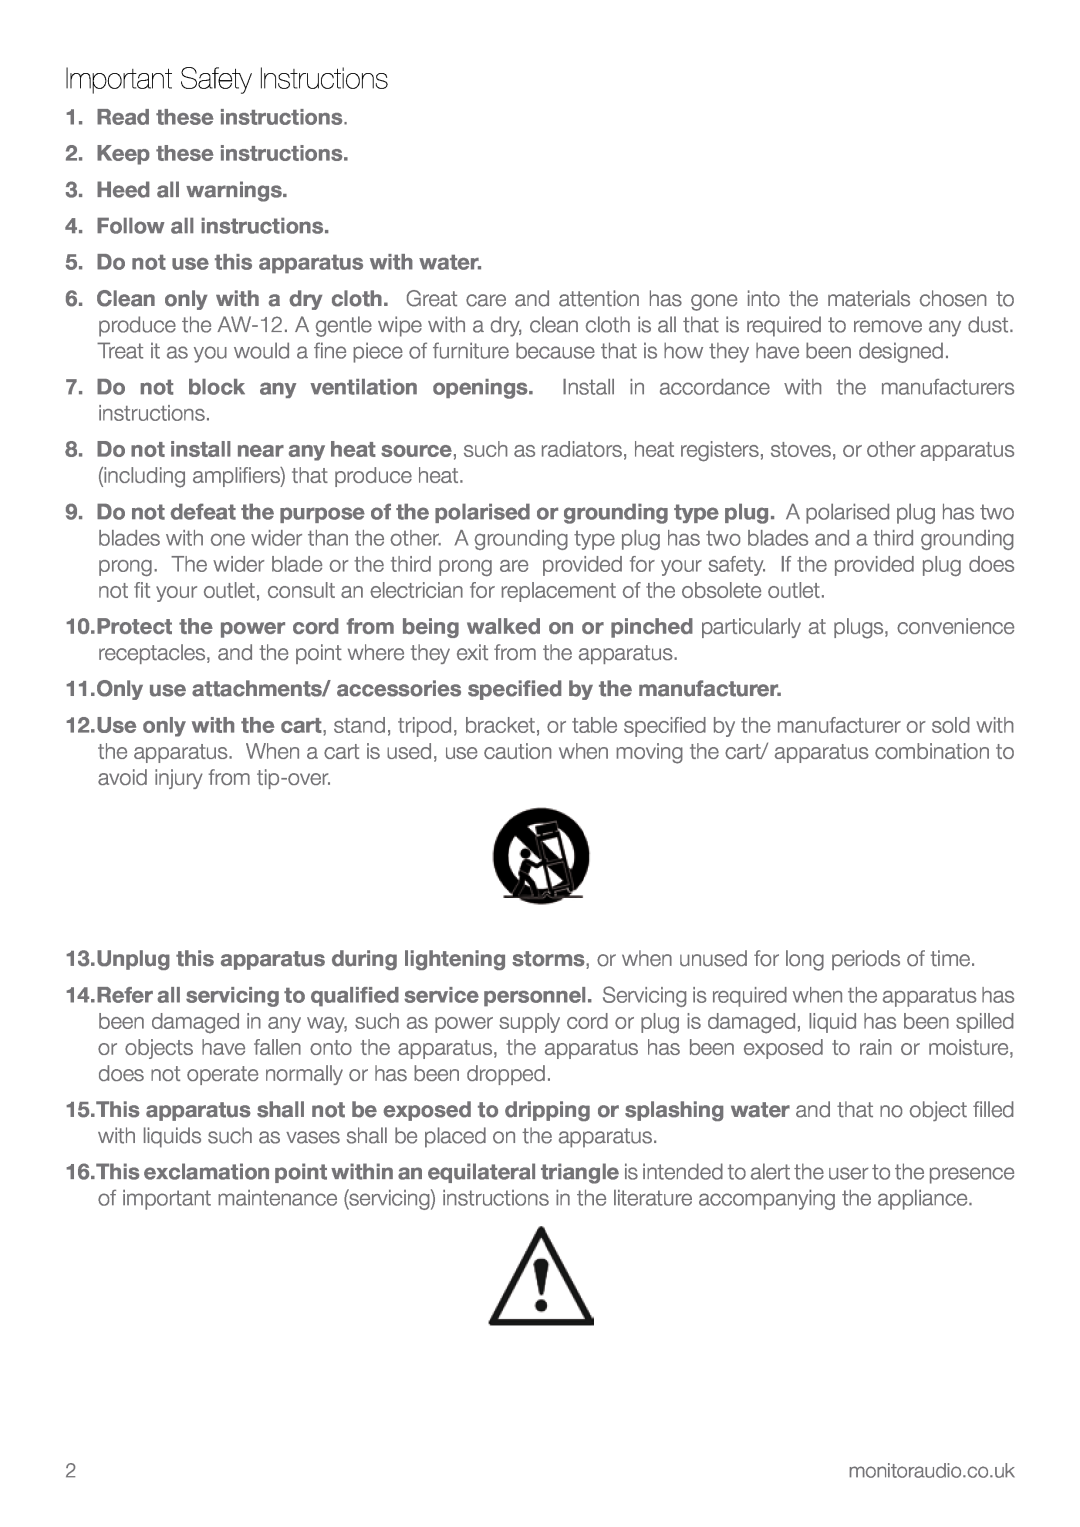 Apex Digital AW-12 Important Safety Instructions, Read these instructions, Keep these instructions 3.Heed all warnings 